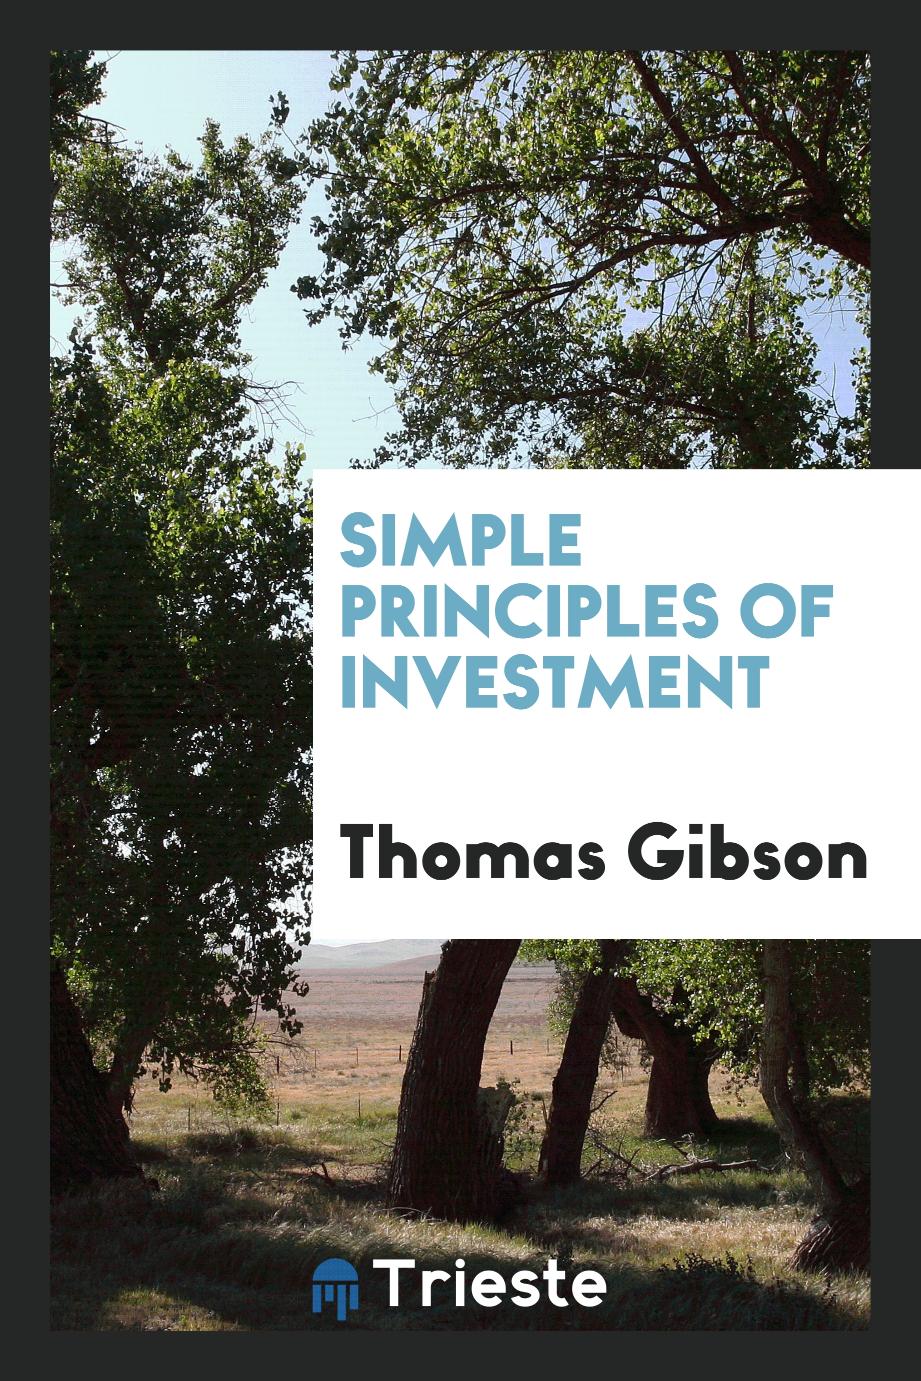 Simple principles of investment